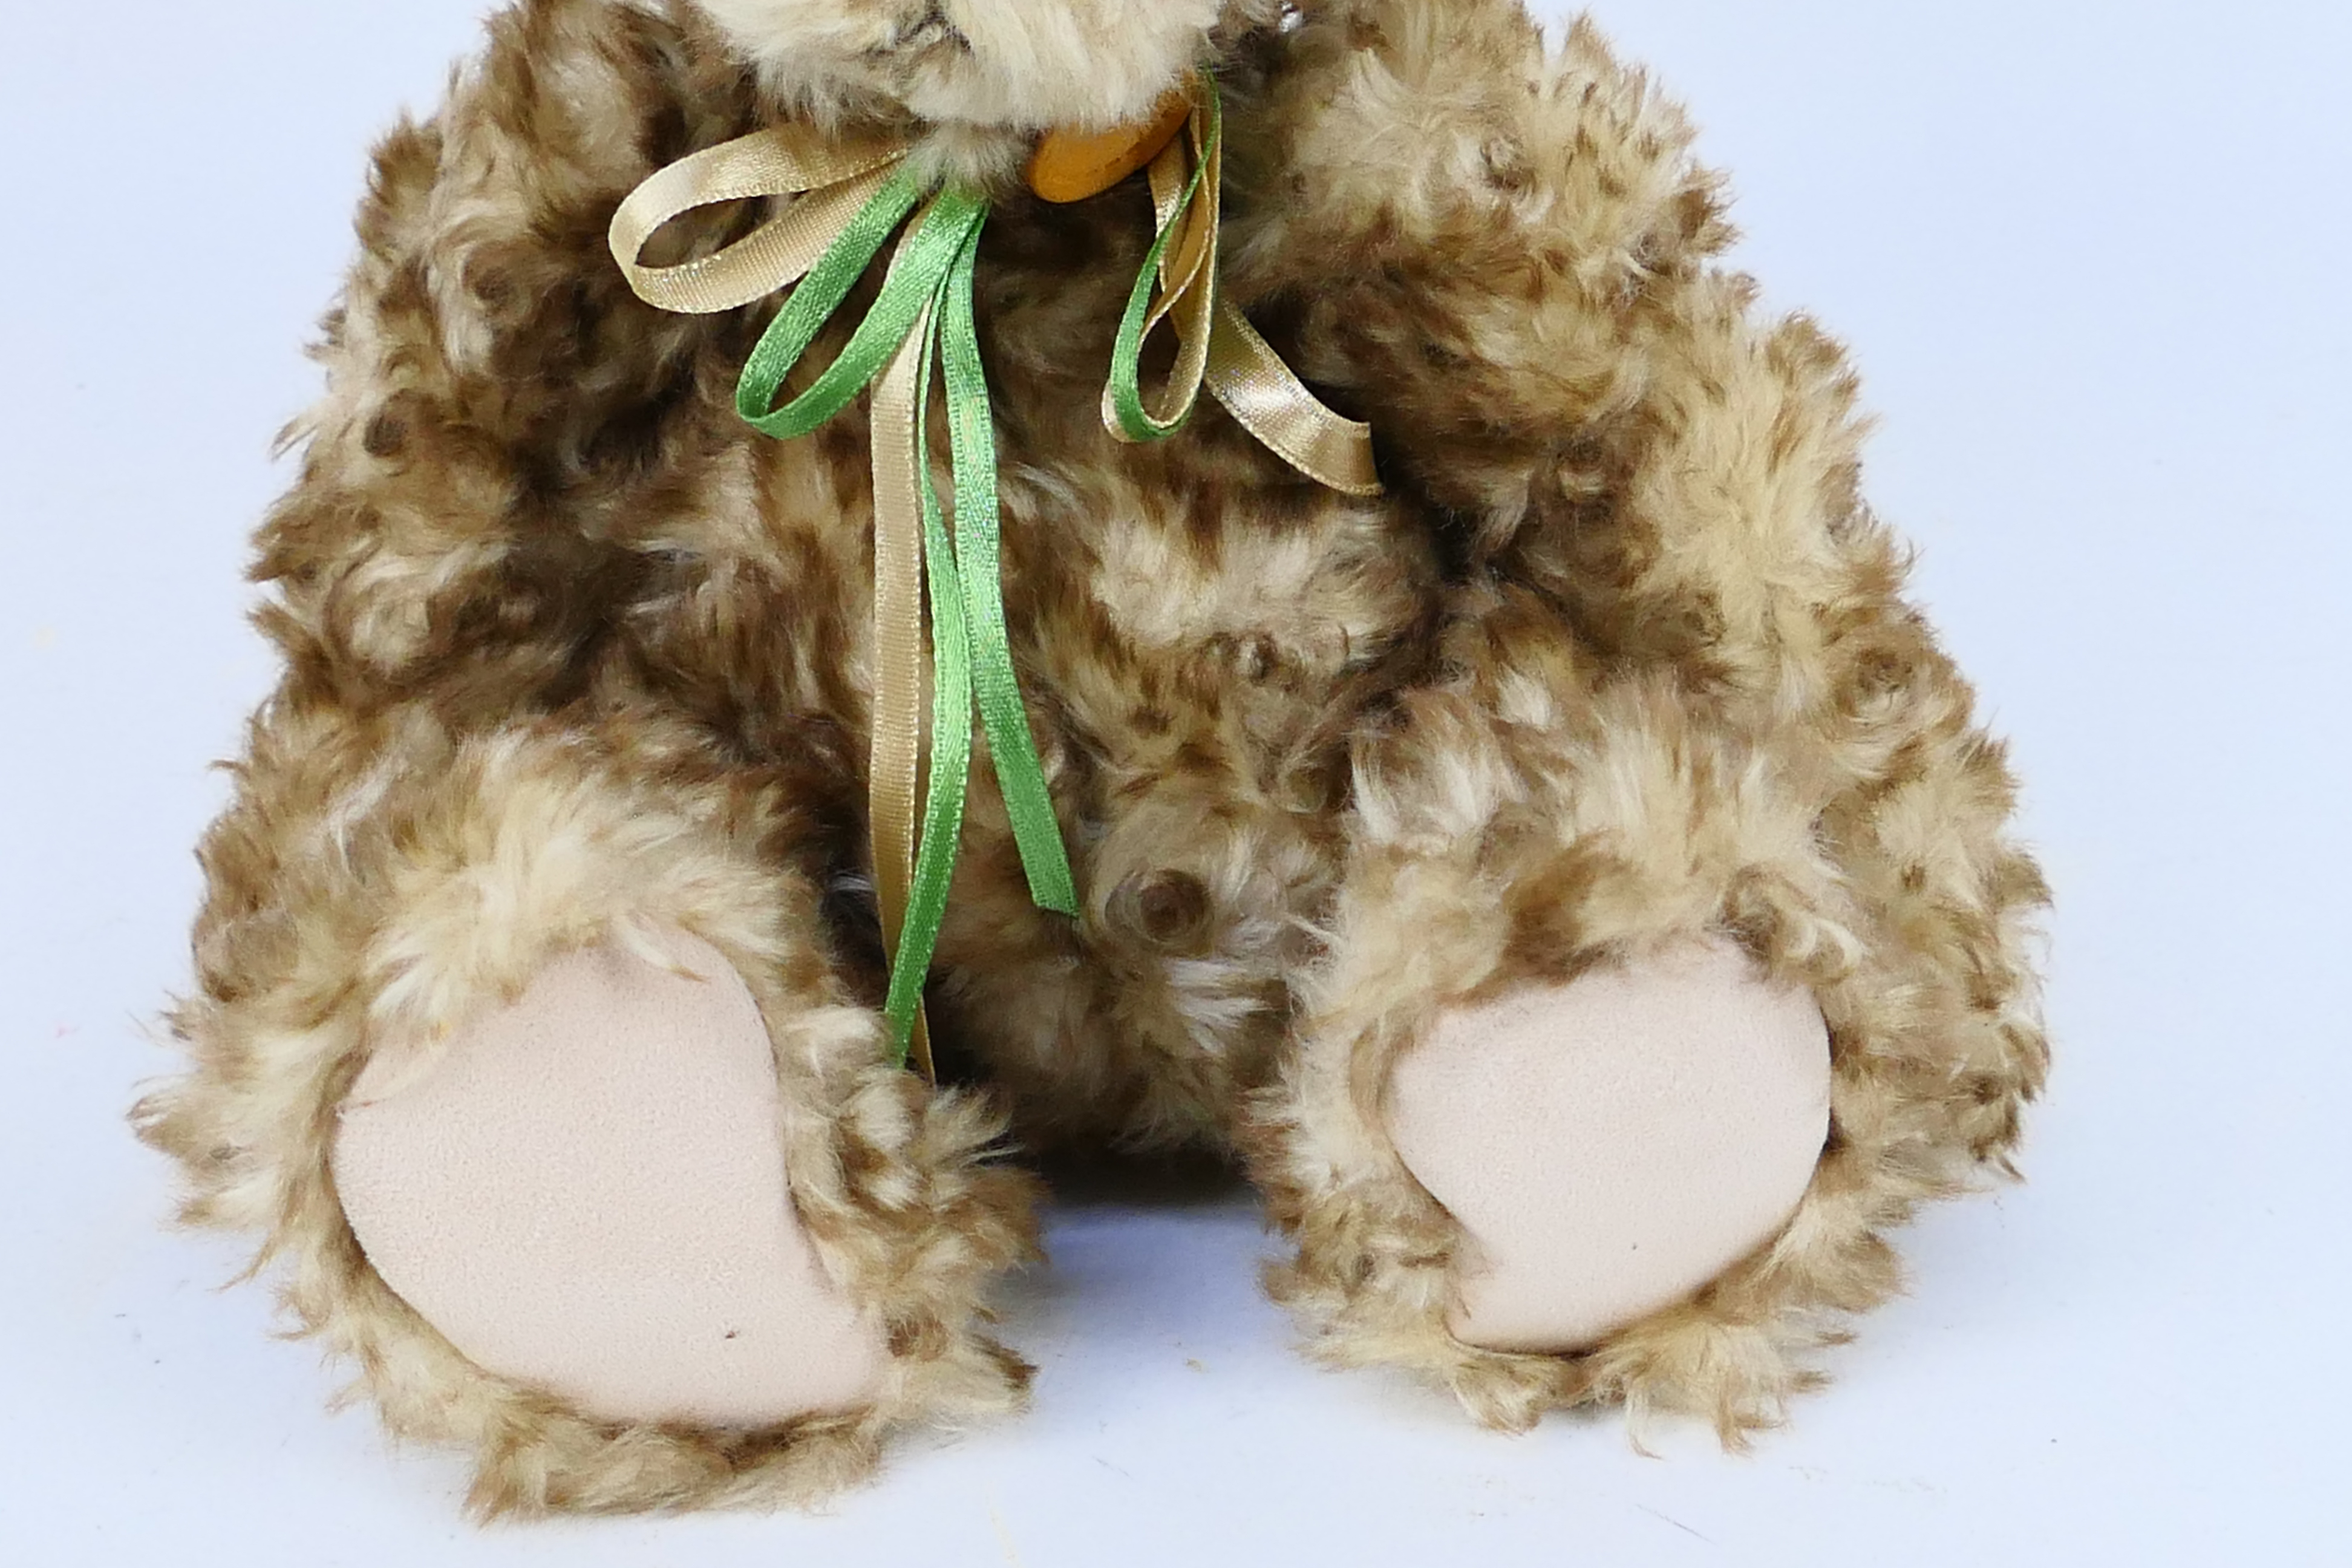 Charlie Bears - An unmarked Charlie Bears soft toy teddy bear with jointed limbs, - Image 4 of 5